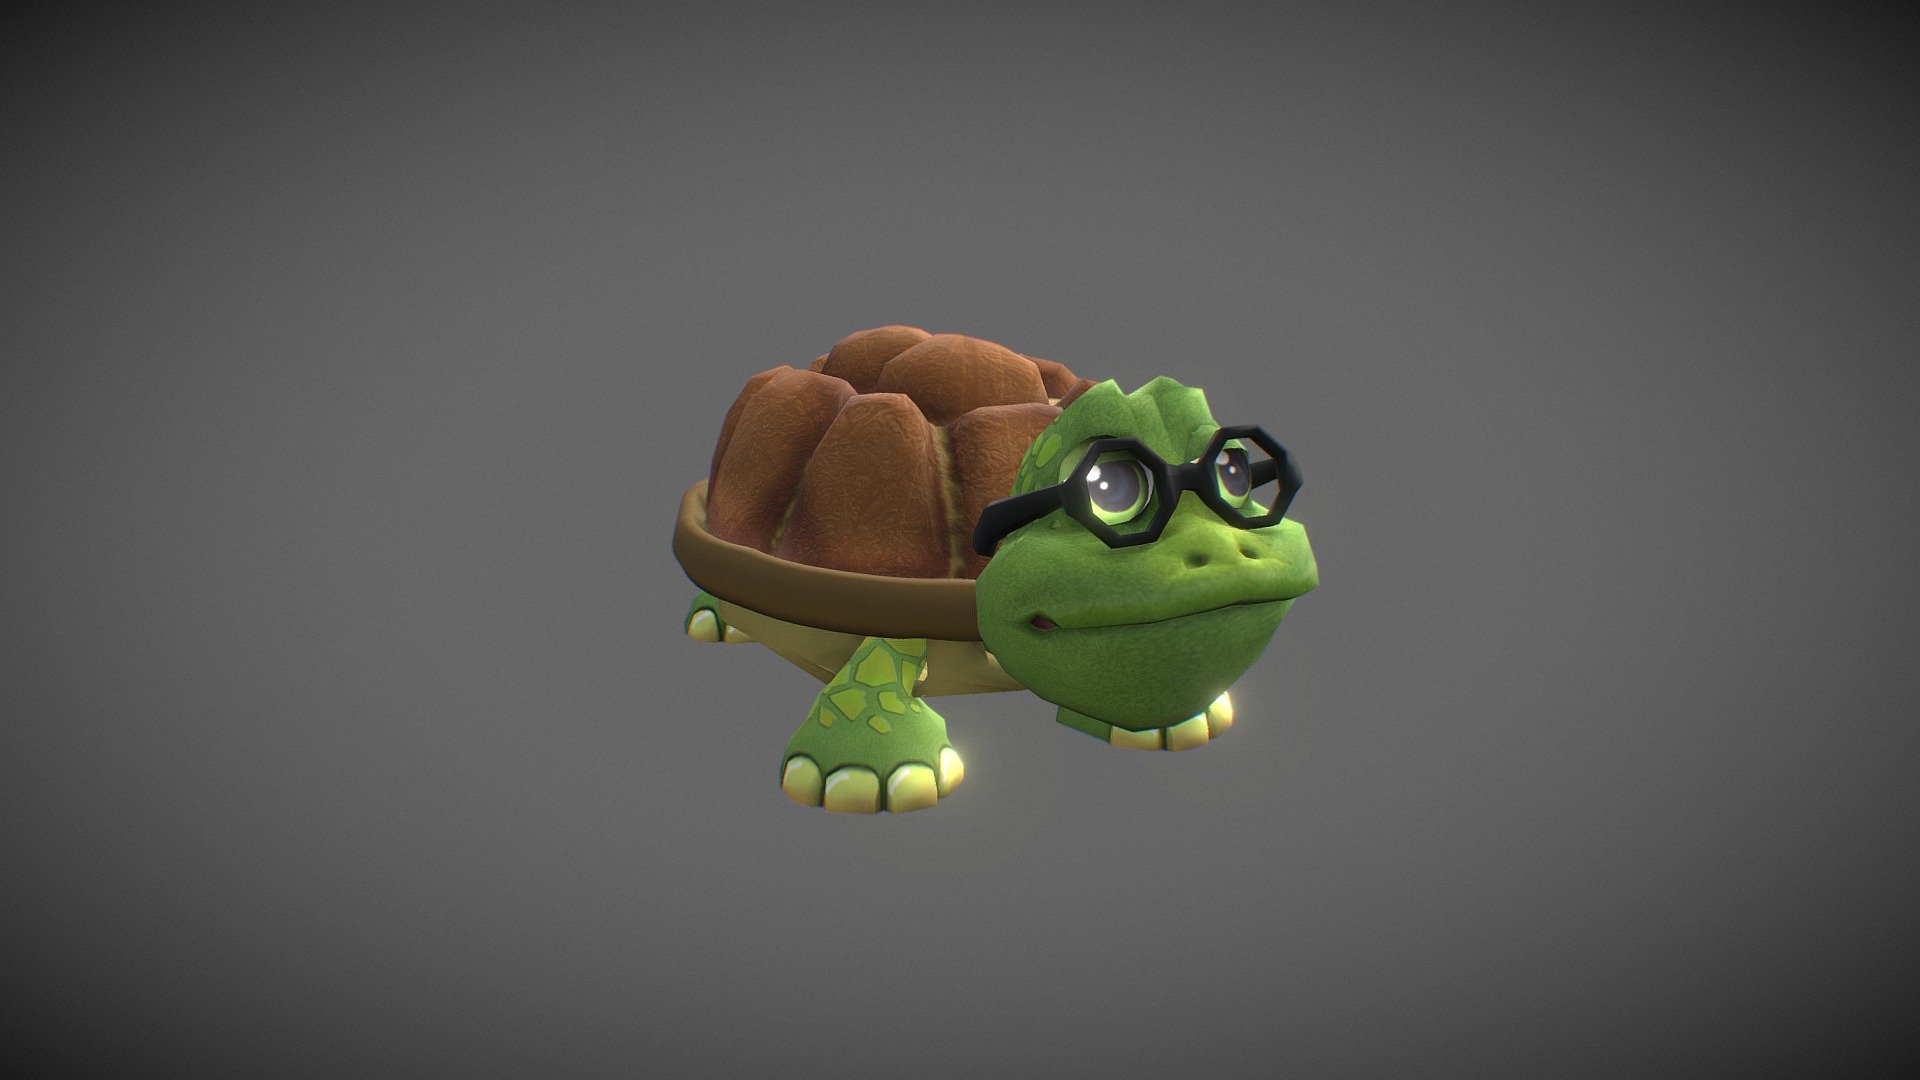 Cartoon turtle made for some mobile app. Modeled in Blender, textured in Photoshop 3d model